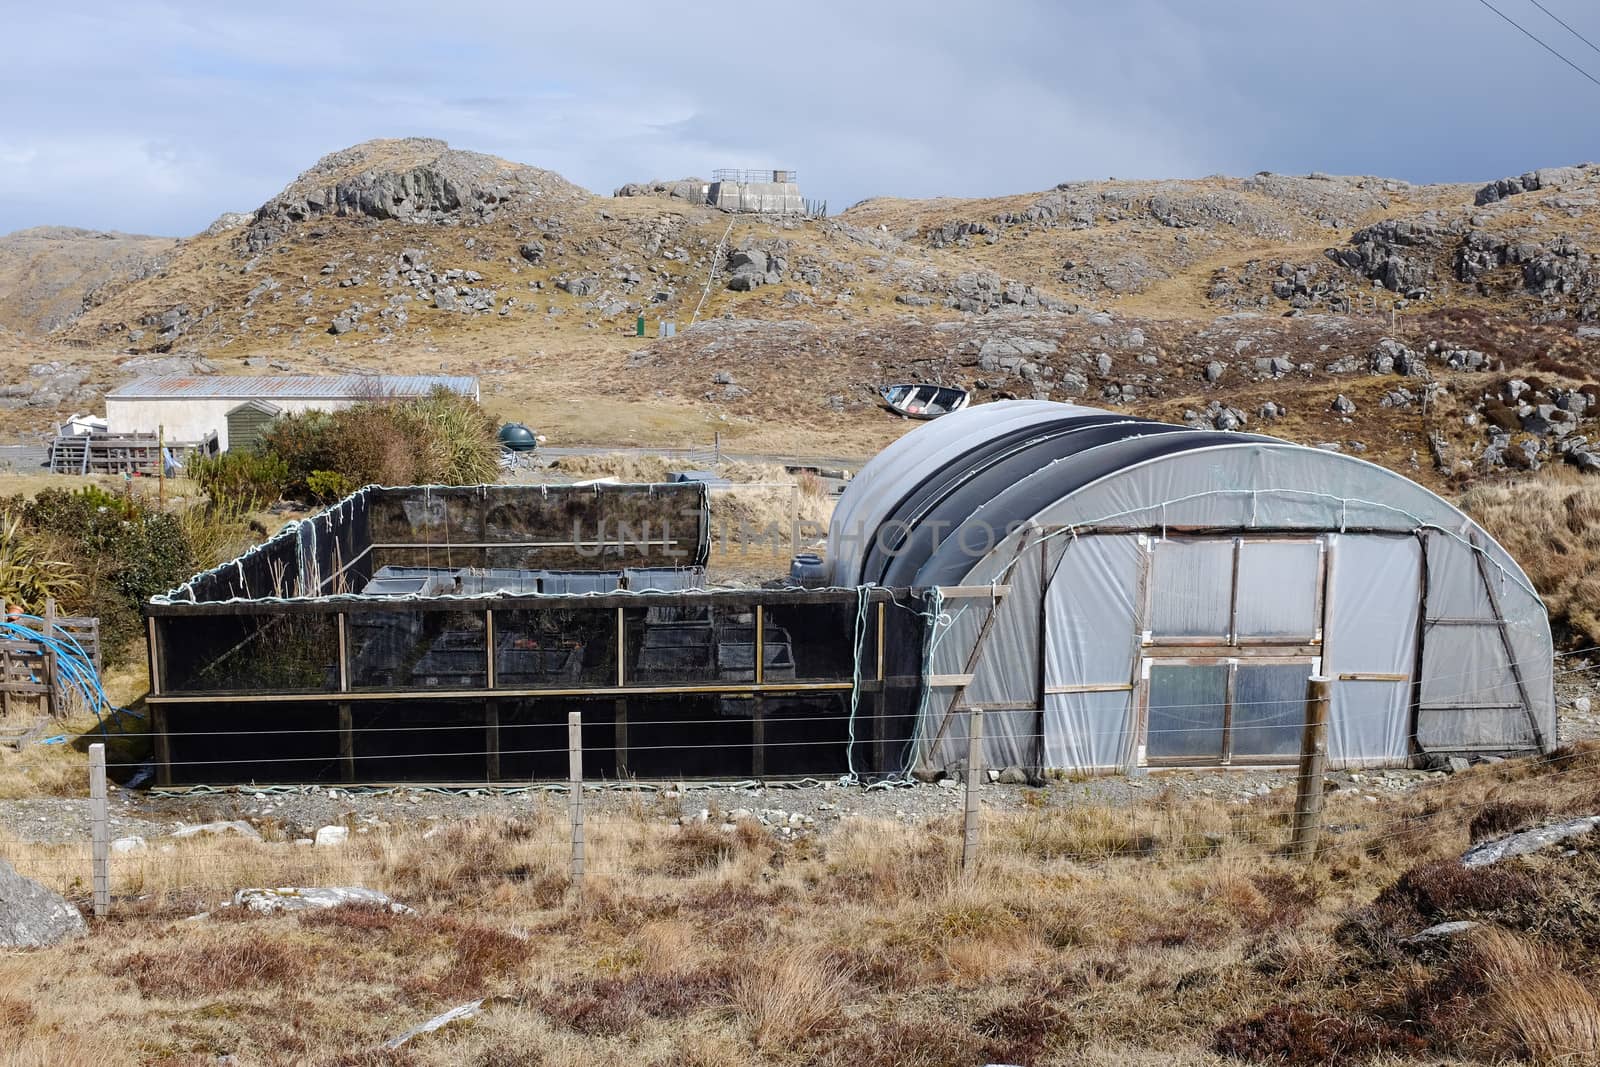 A poly tunnel on moorland with fence and enclosure area.